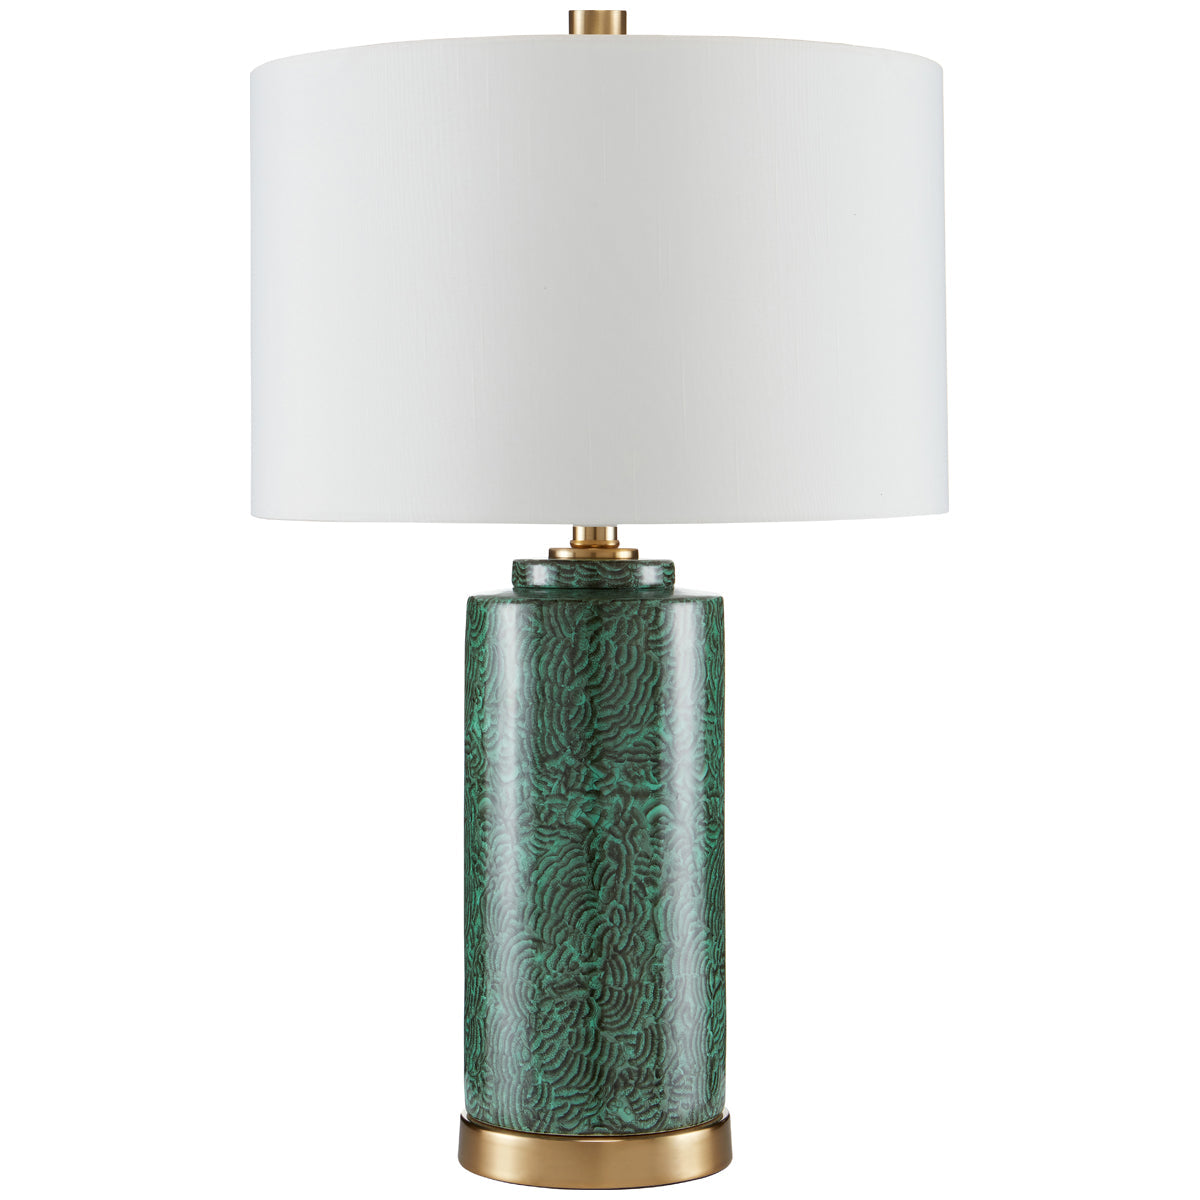 Currey and Company St. Isaac Table Lamp